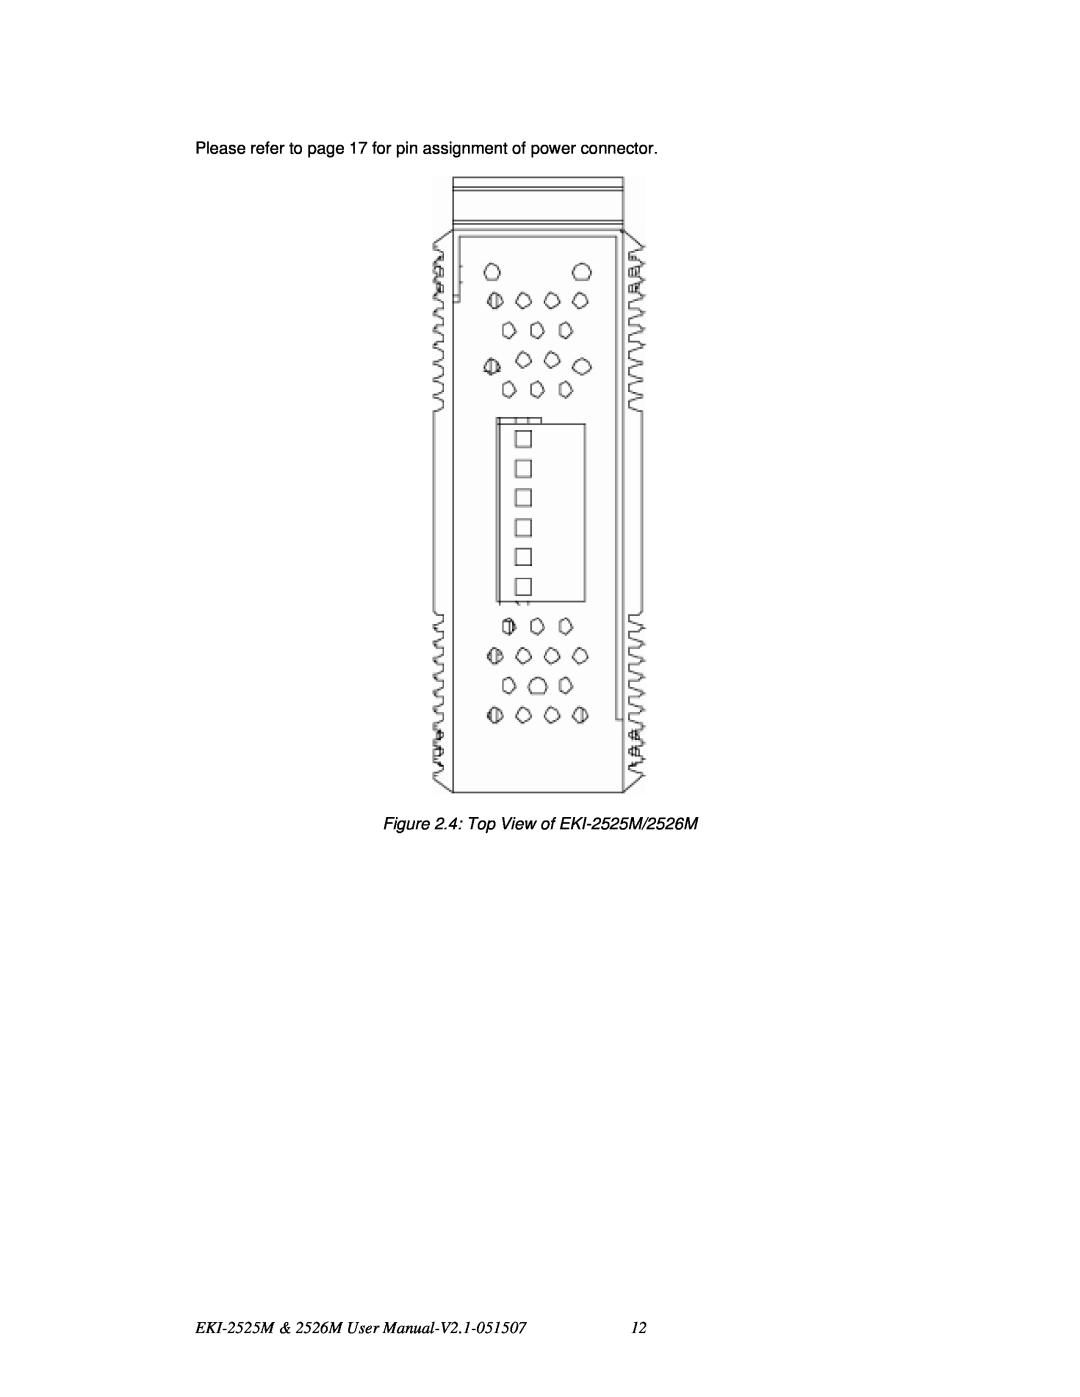 Advantech EKI-2526M Please refer to page 17 for pin assignment of power connector, 4 Top View of EKI-2525M/2526M 